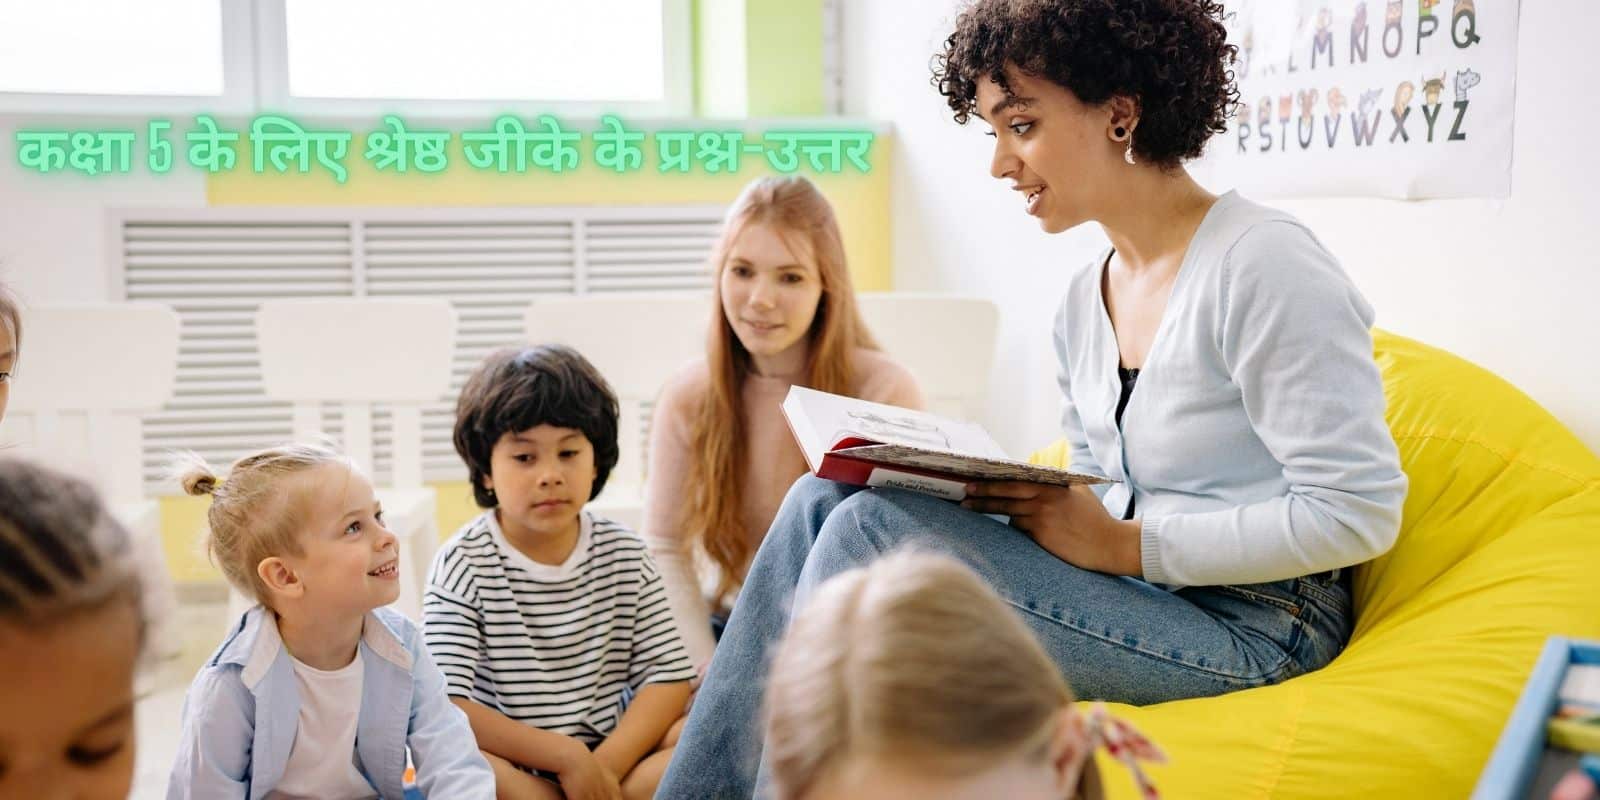 GK questions in hindi for class 5